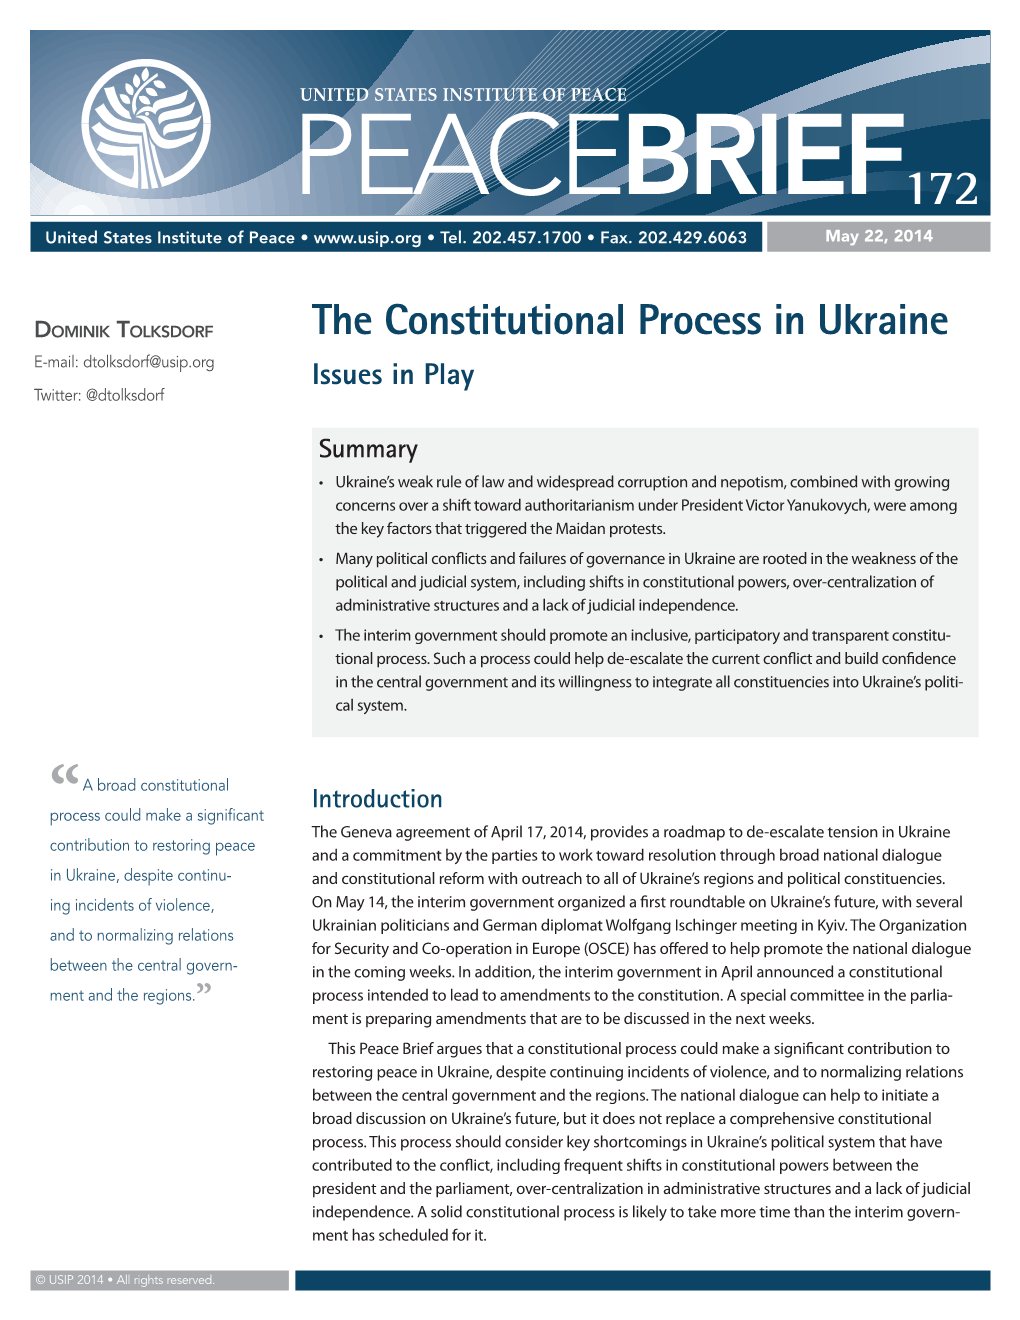 The Constitutional Process in Ukraine E-Mail: Dtolksdorf@Usip.Org Issues in Play Twitter: @Dtolksdorf